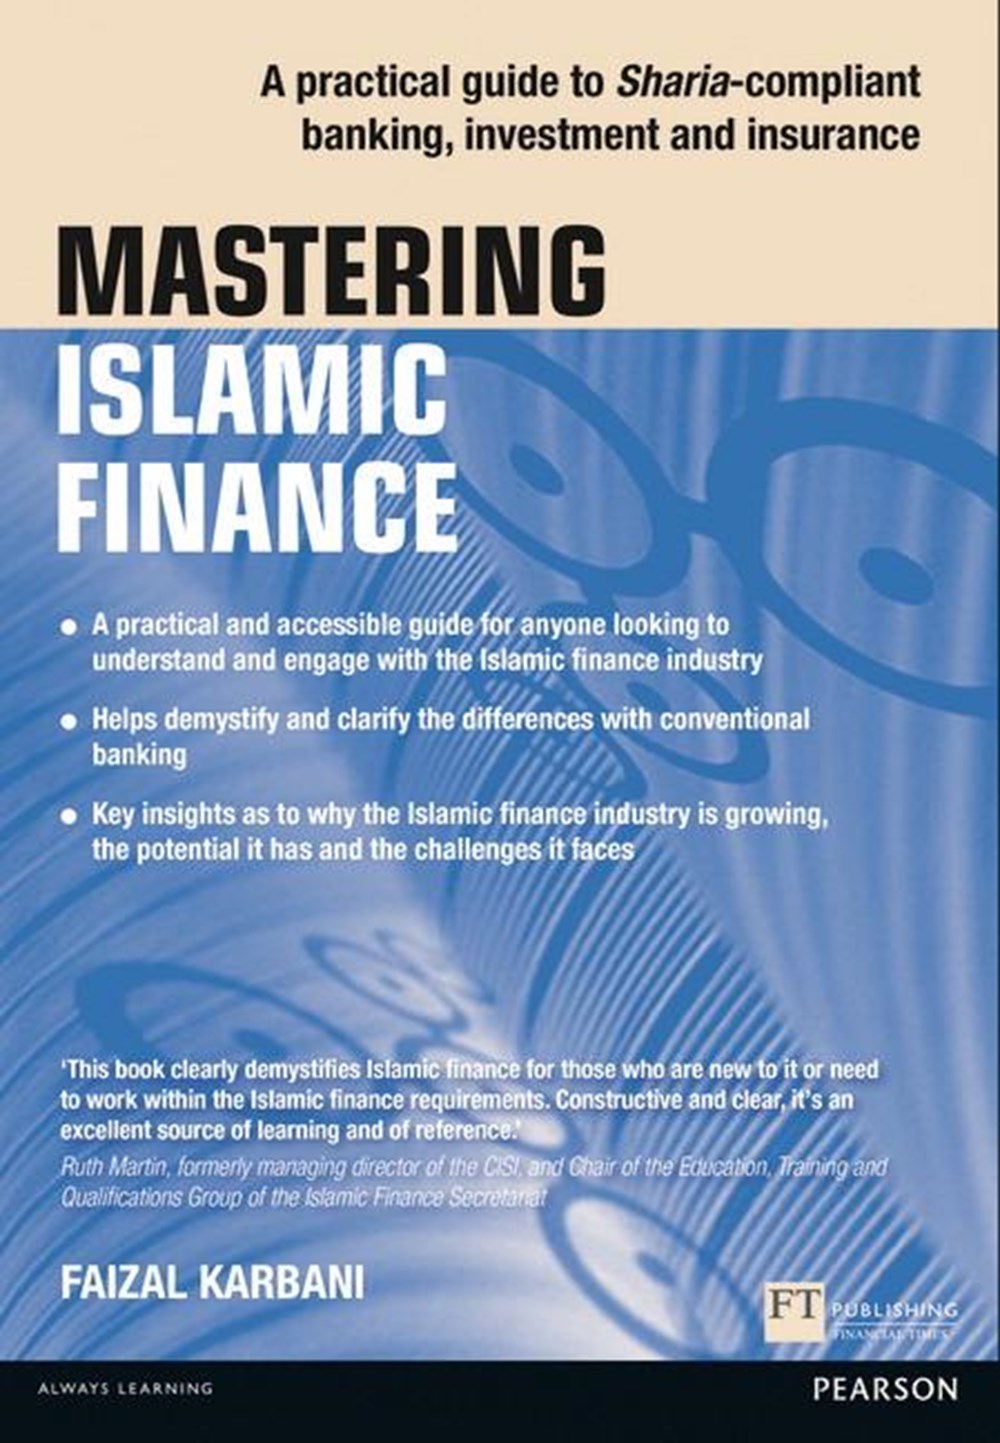 Mastering Islamic Finance A Practical Guide to Sharia-Compliant Banking, Investment and Insurance